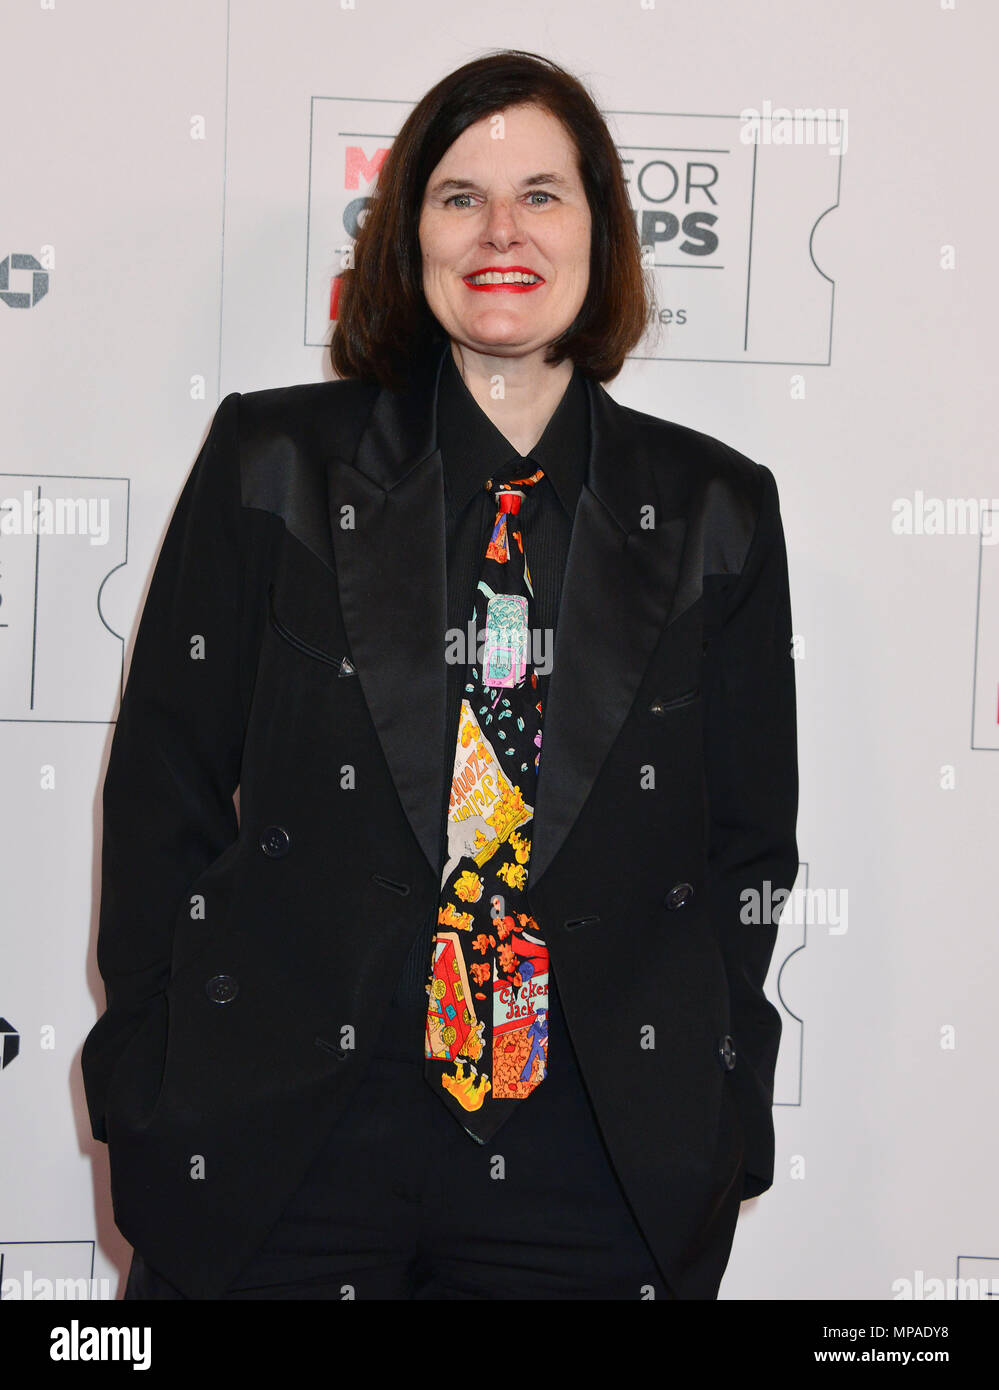 Paula Poundstone 060 at the Movies For Grow Ups - AARP - at the Beverly Wilshire Hotel in Los Angeles. February 8, 2016.Paula Poundstone 060 ------------- Red Carpet Event, Vertical, USA, Film Industry, Celebrities,  Photography, Bestof, Arts Culture and Entertainment, Topix Celebrities fashion /  Vertical, Best of, Event in Hollywood Life - California,  Red Carpet and backstage, USA, Film Industry, Celebrities,  movie celebrities, TV celebrities, Music celebrities, Photography, Bestof, Arts Culture and Entertainment,  Topix, Three Quarters, vertical, one person,, from the year , 2016, inquiry Stock Photo